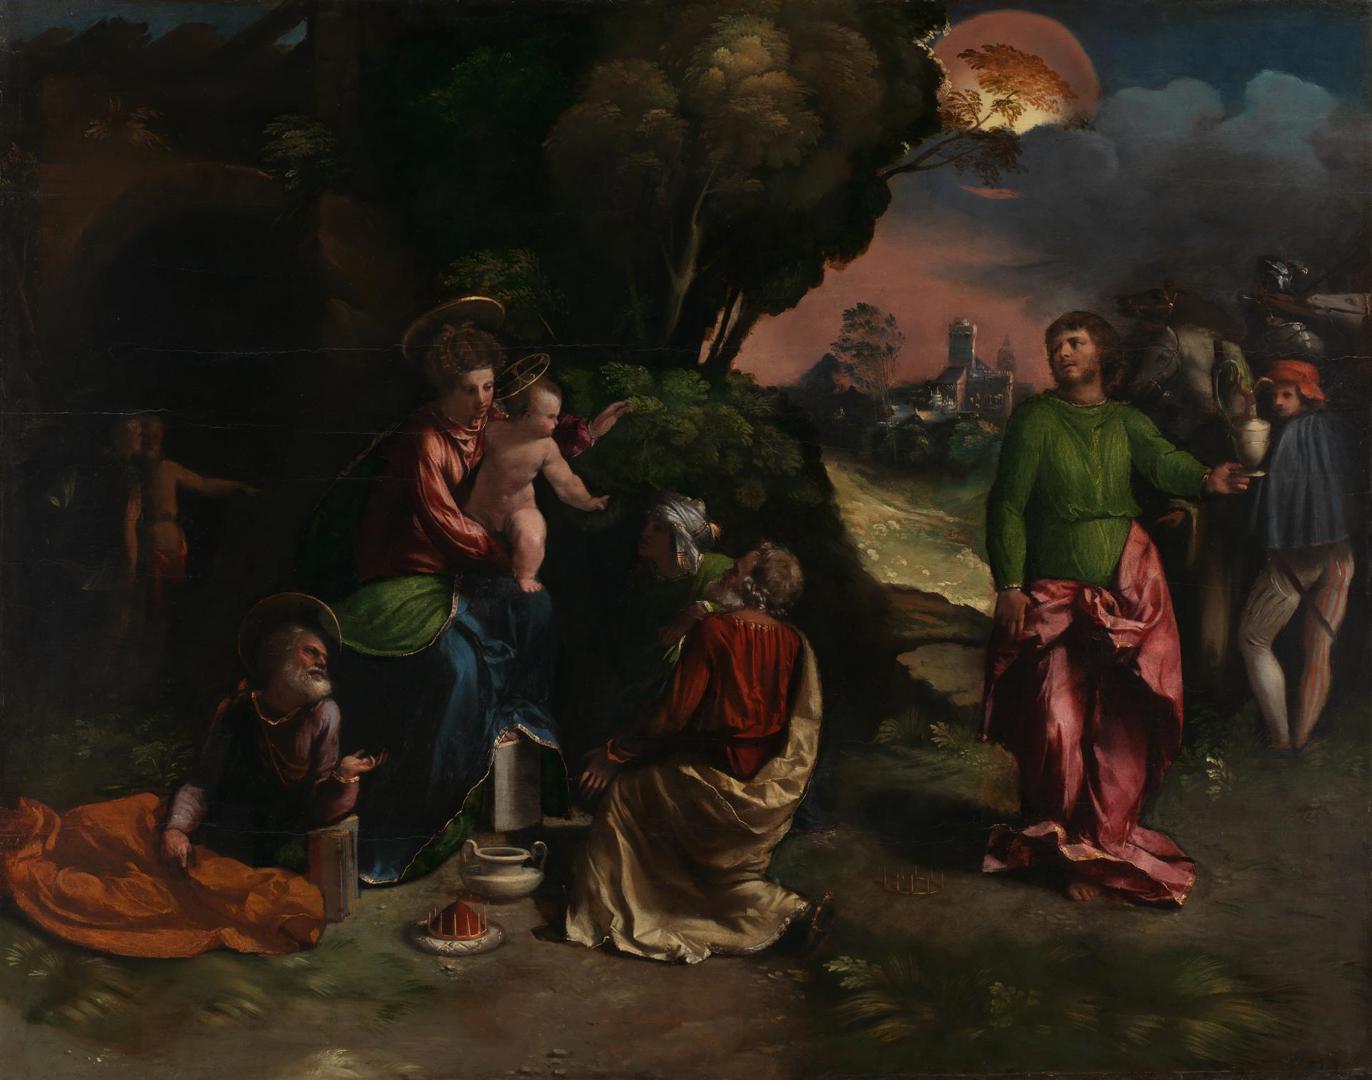 The Adoration of the Kings by Dosso Dossi